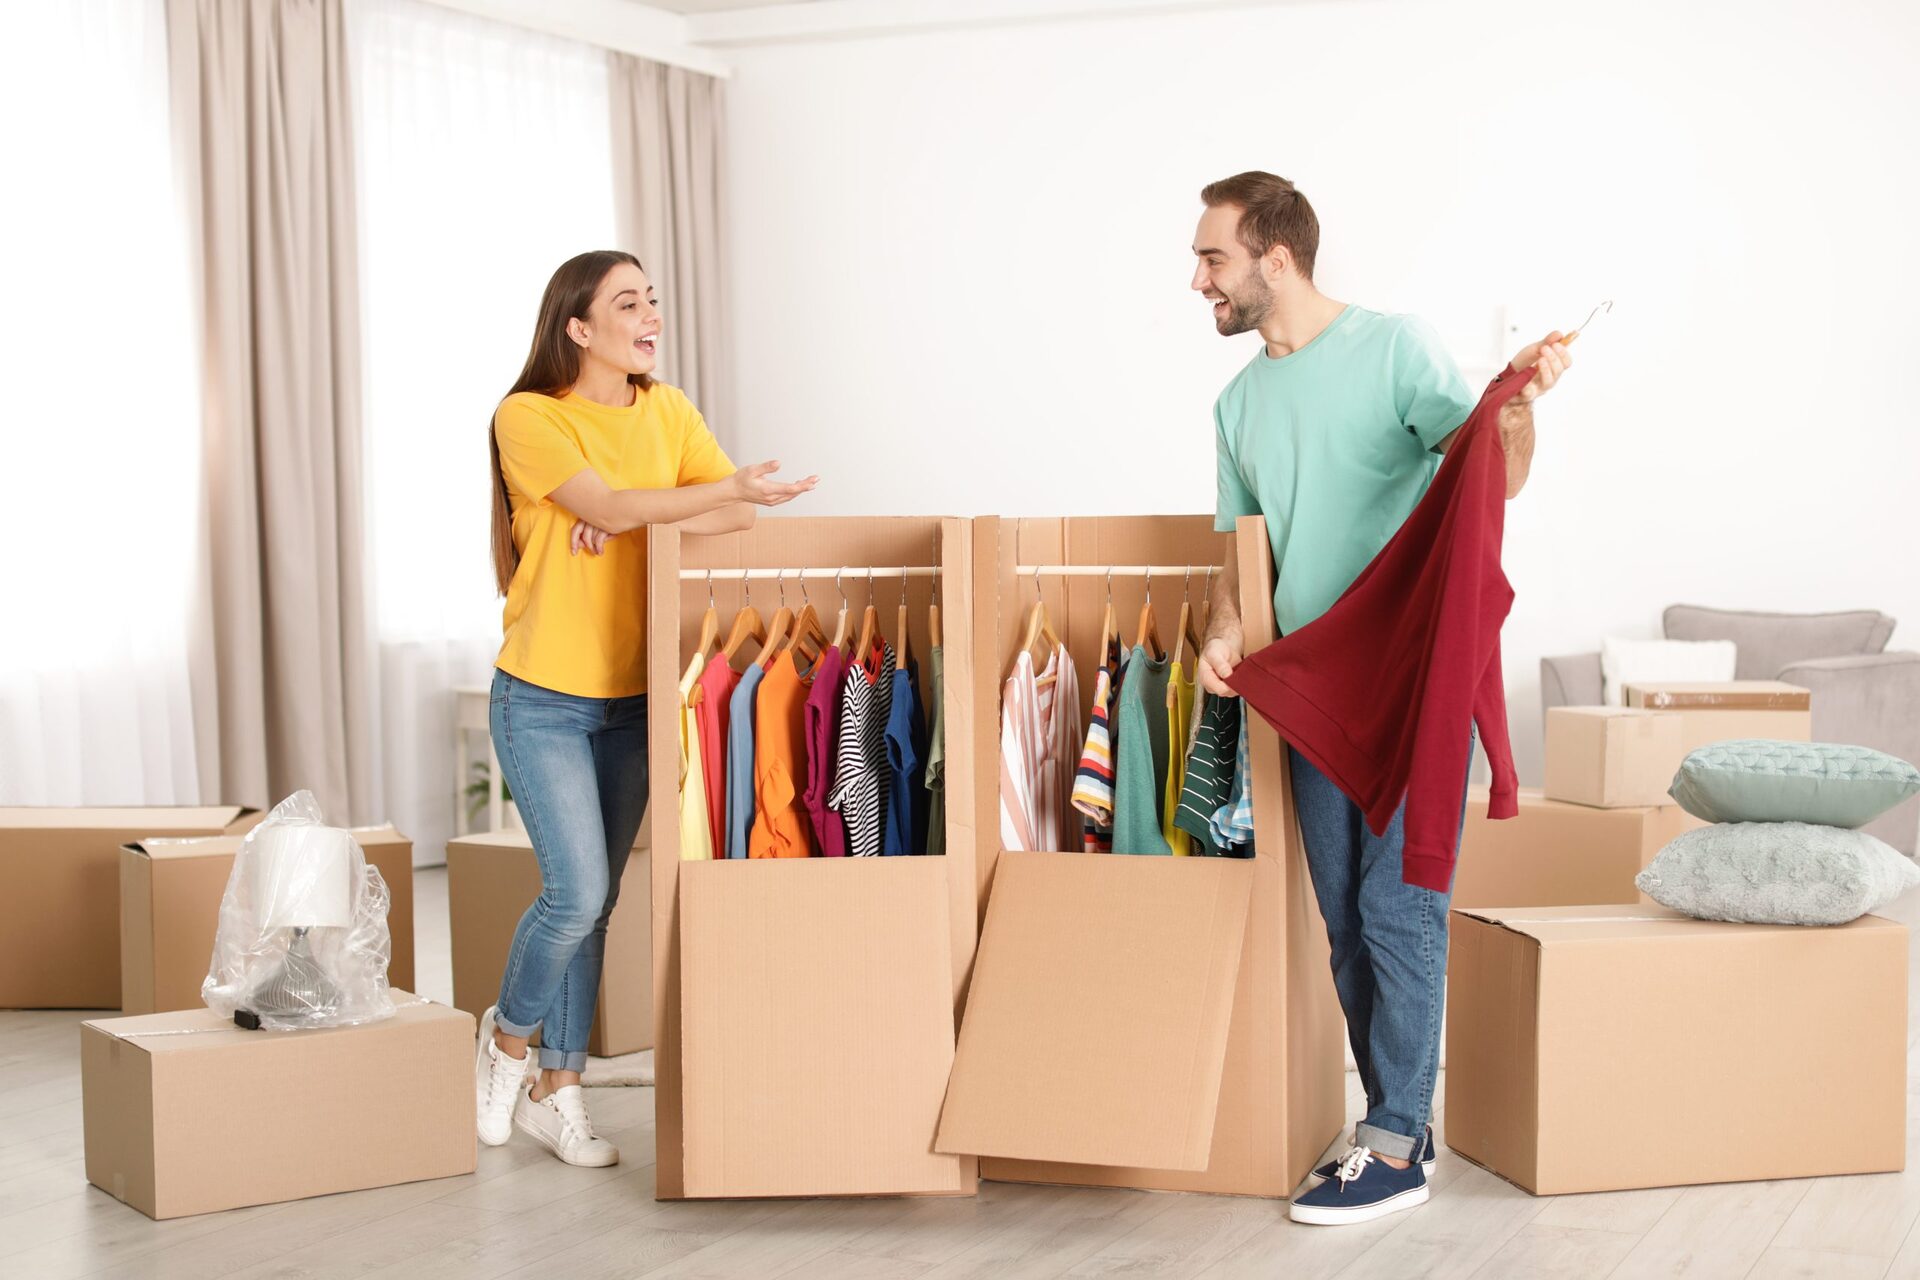 How To Store Clothes In Storage Unit